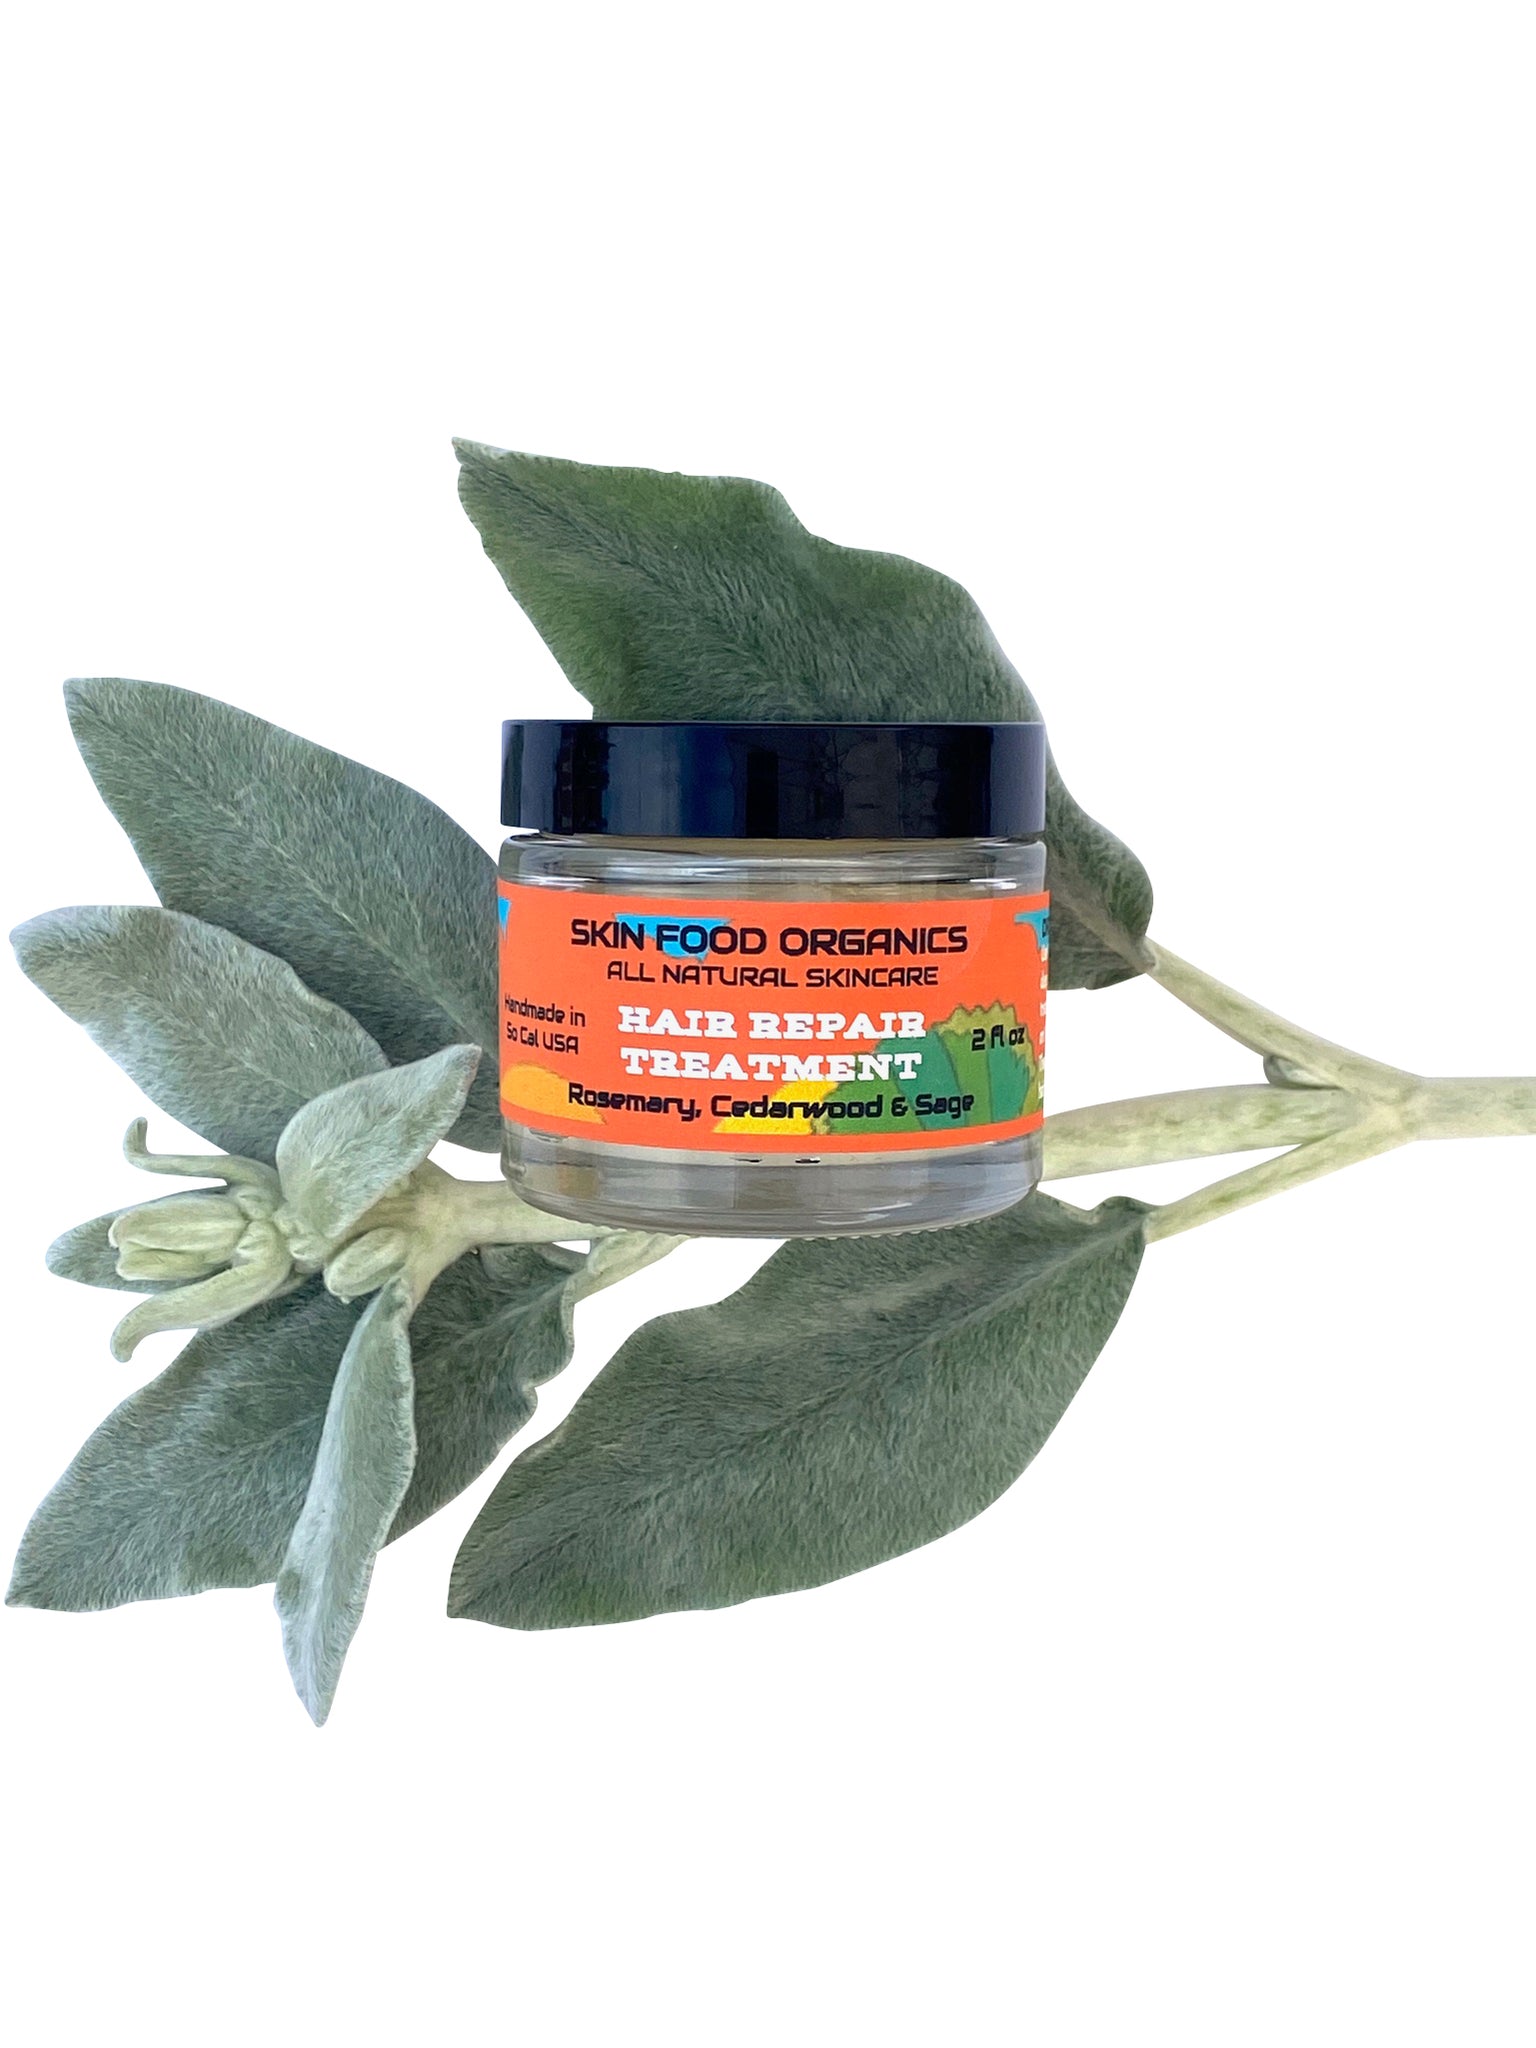 Skin Food Organics USA Hair Treatment is a deep hair conditioning treatment for normal, dry or damaged hair. Helps stimulate hair growth. slows graying and can be used to treat dandruff and dry scalp. Helps retain hair color and strengthen hair follicles